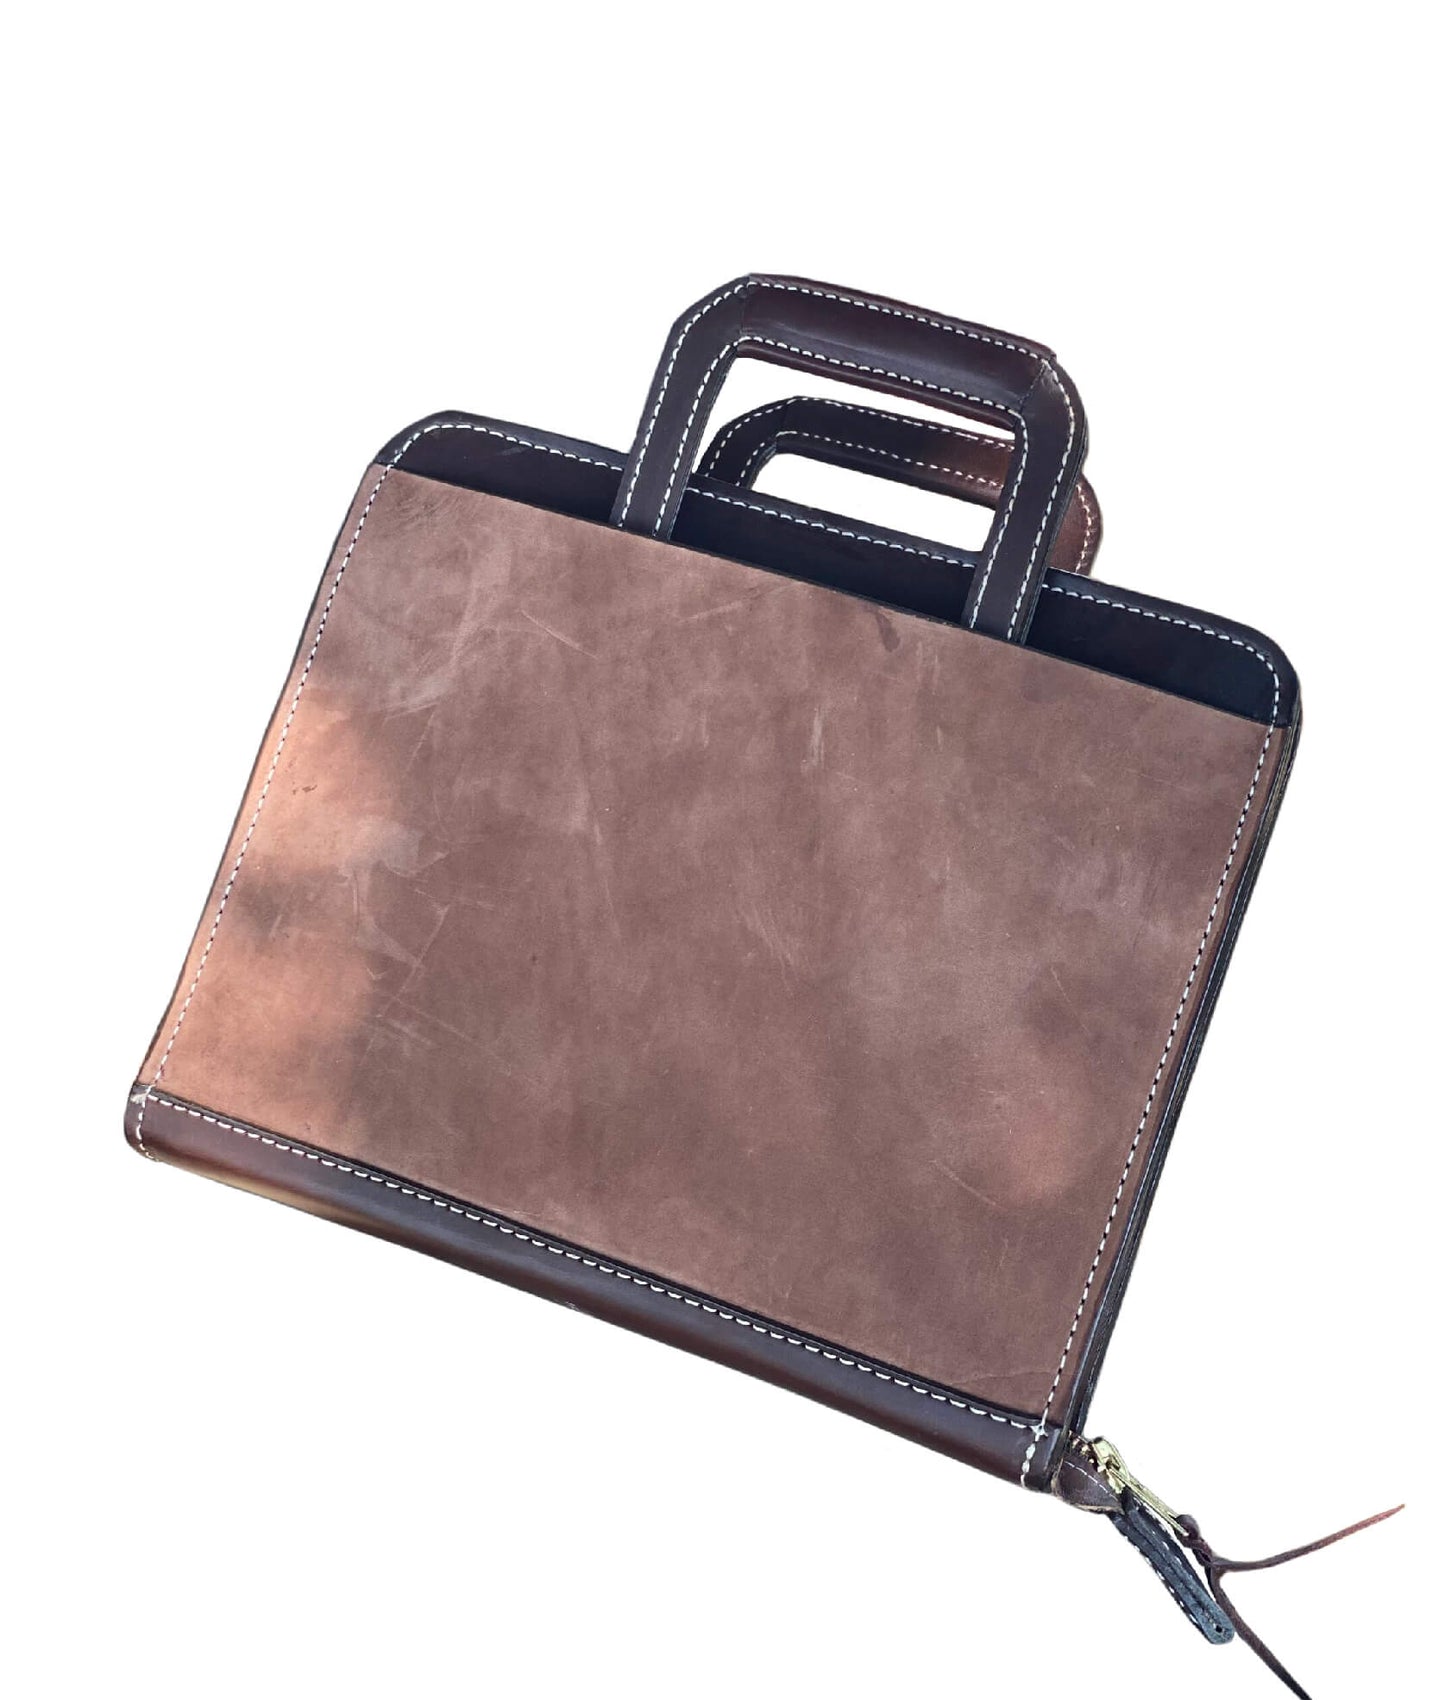 Cowboy Briefcase rough out chocolate leather